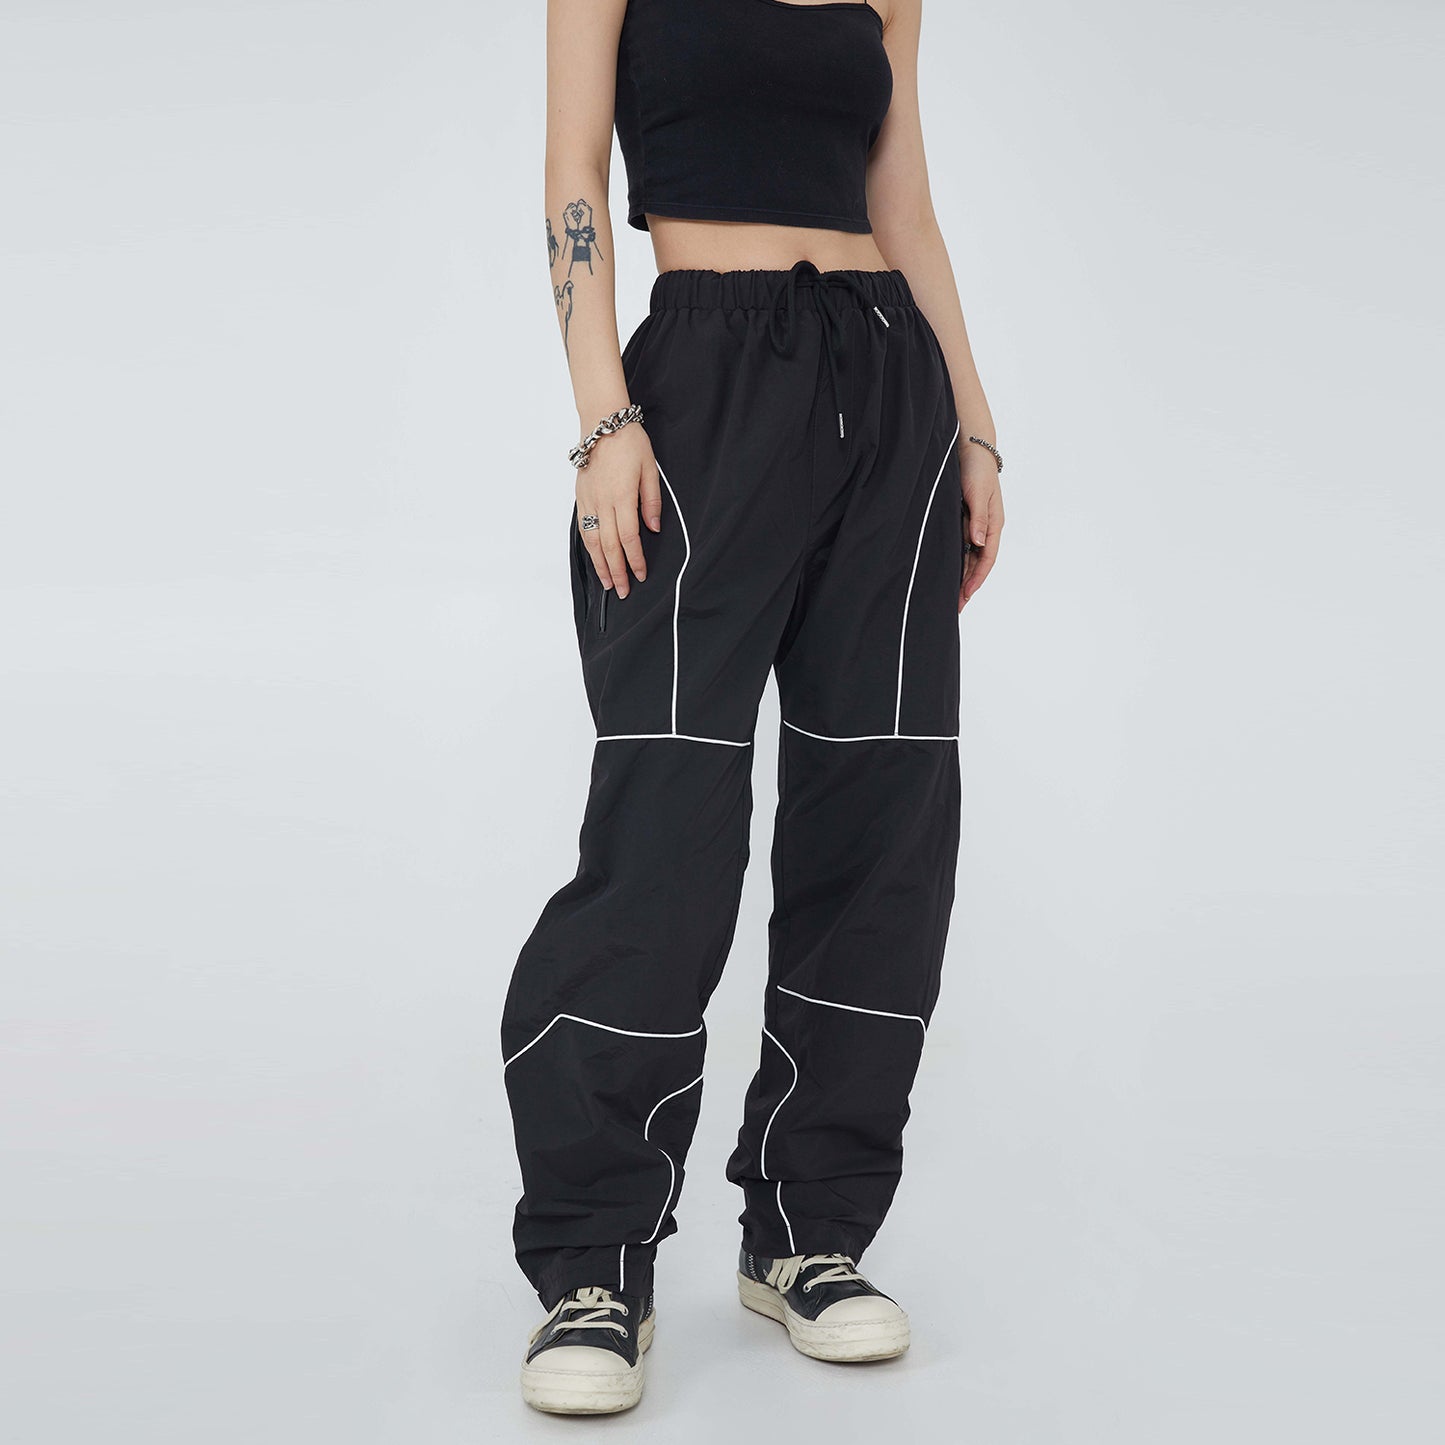 MADE EXTREME BLACK AIR Line Long Pants Black - YOUAREMYPOISON